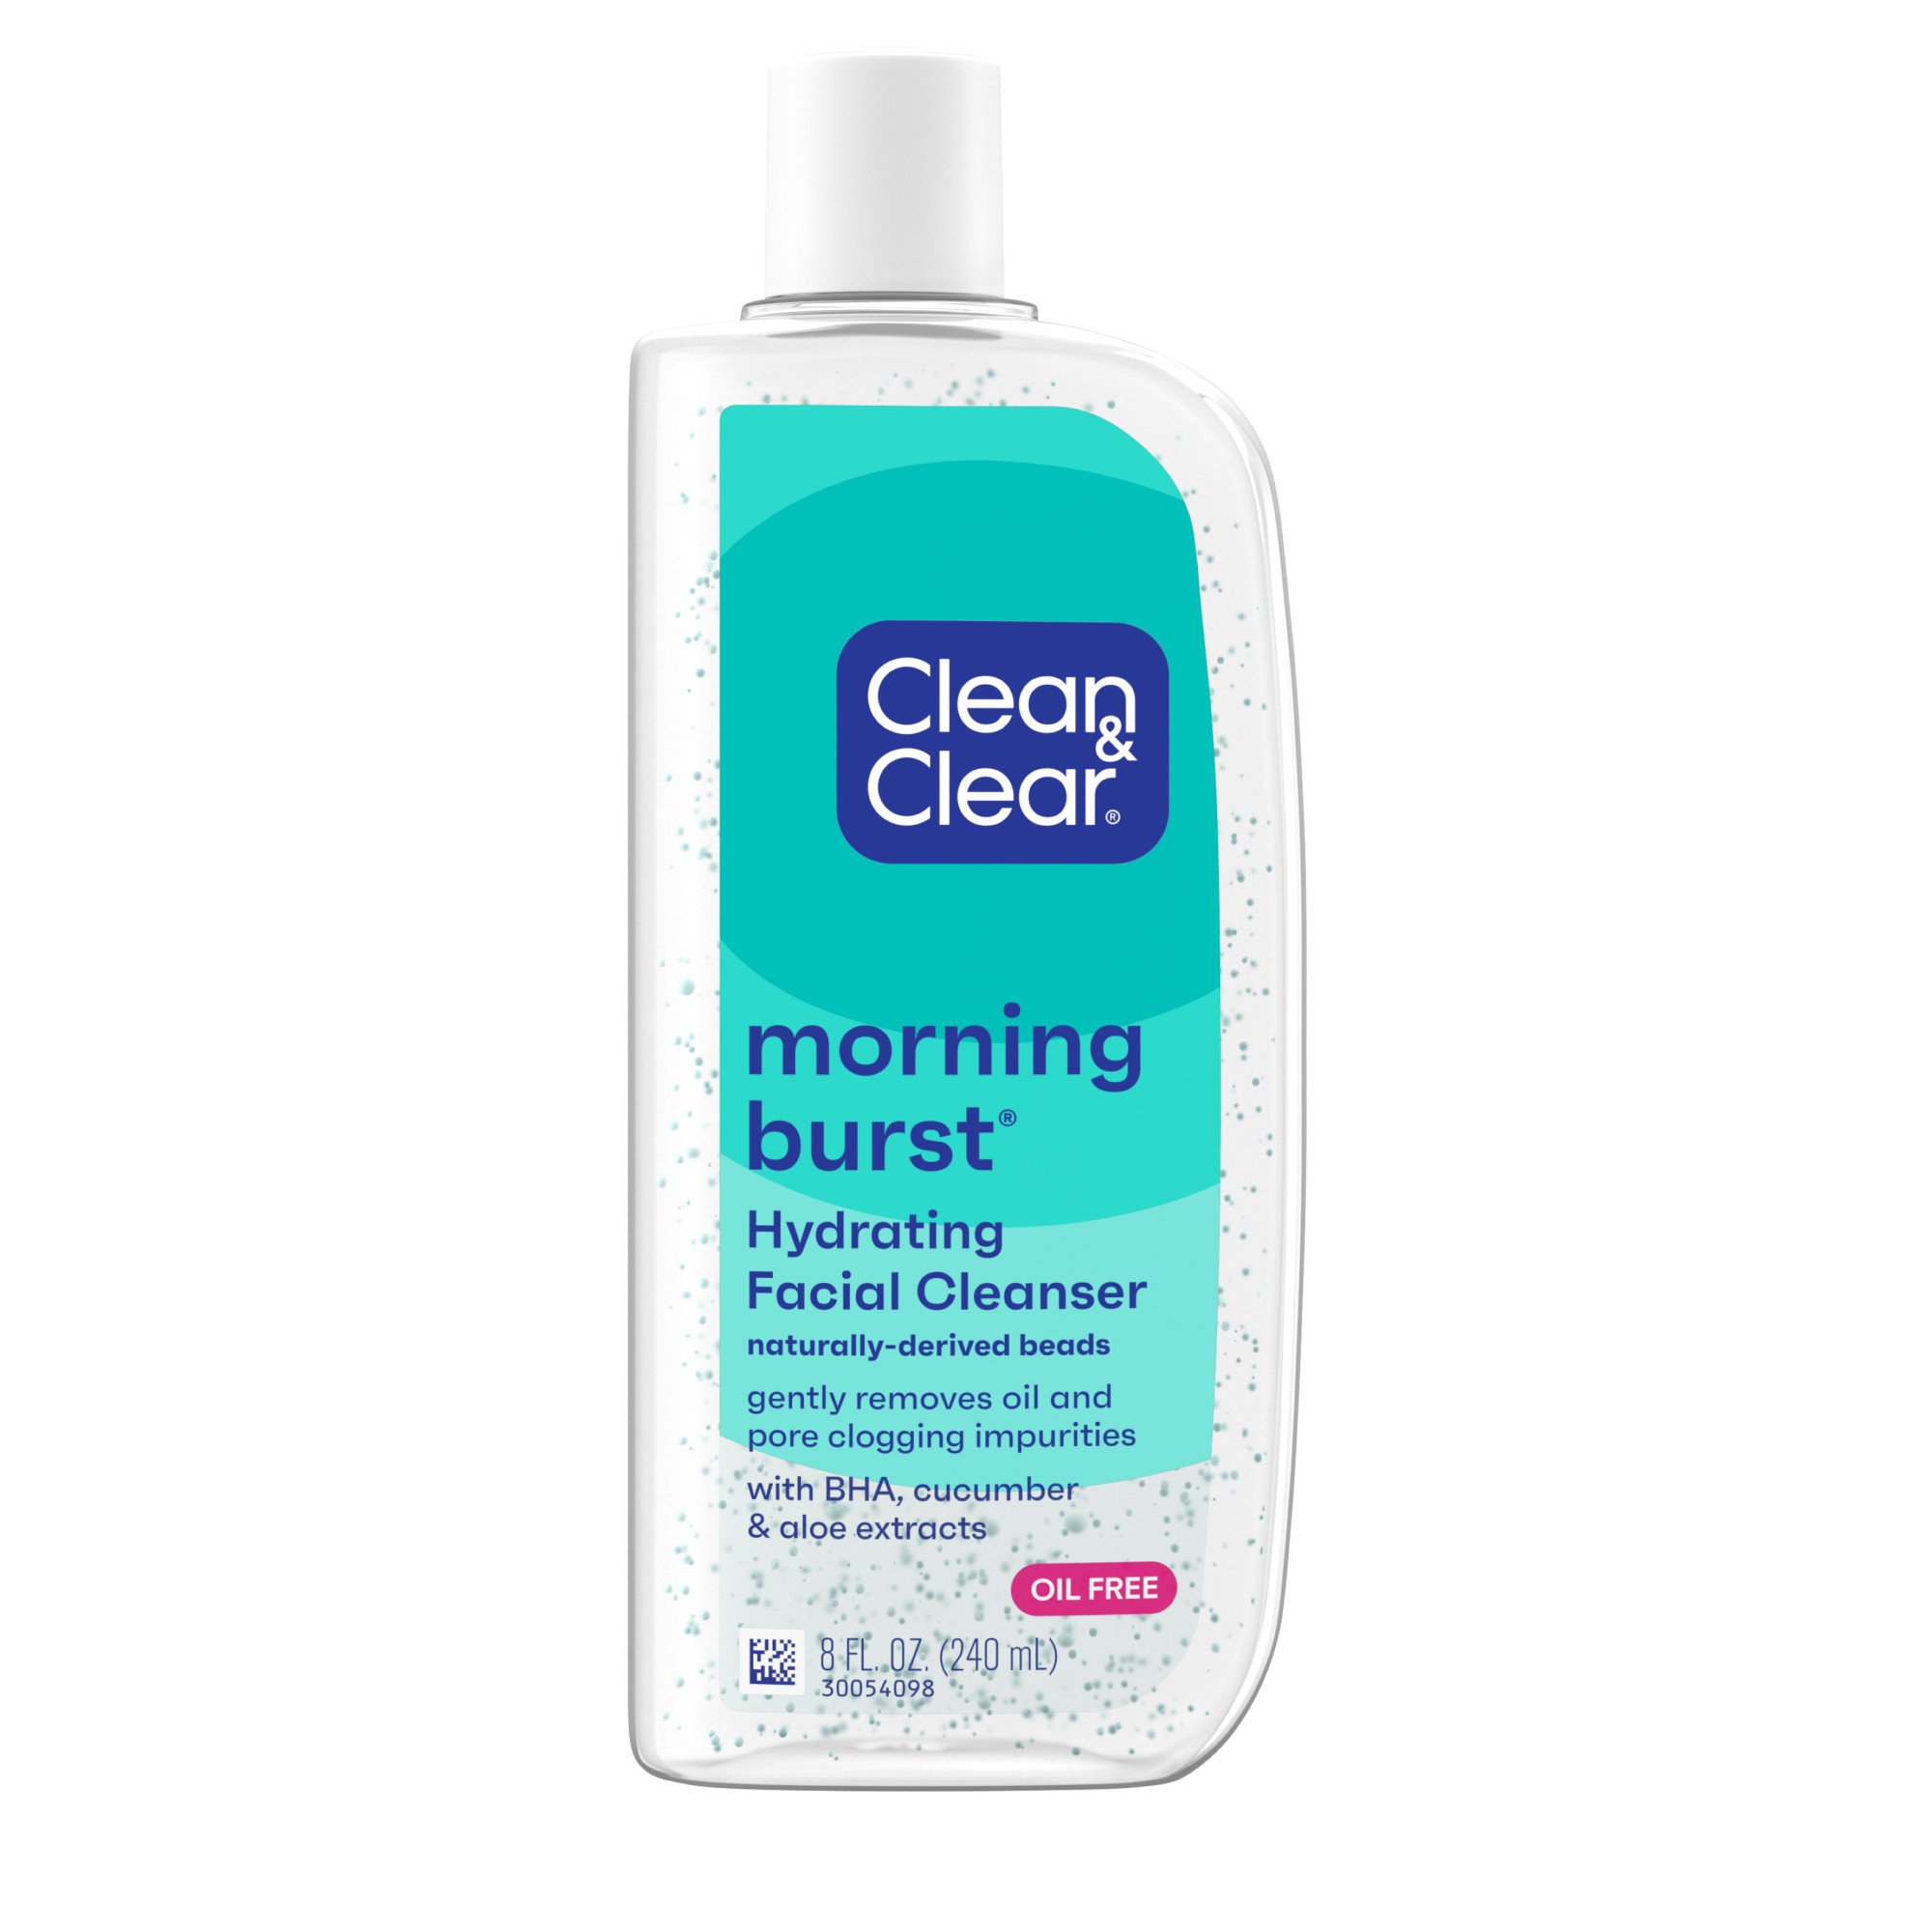 Clean & Clear Morning Burst Hydrating Facial Cleanser - Shop